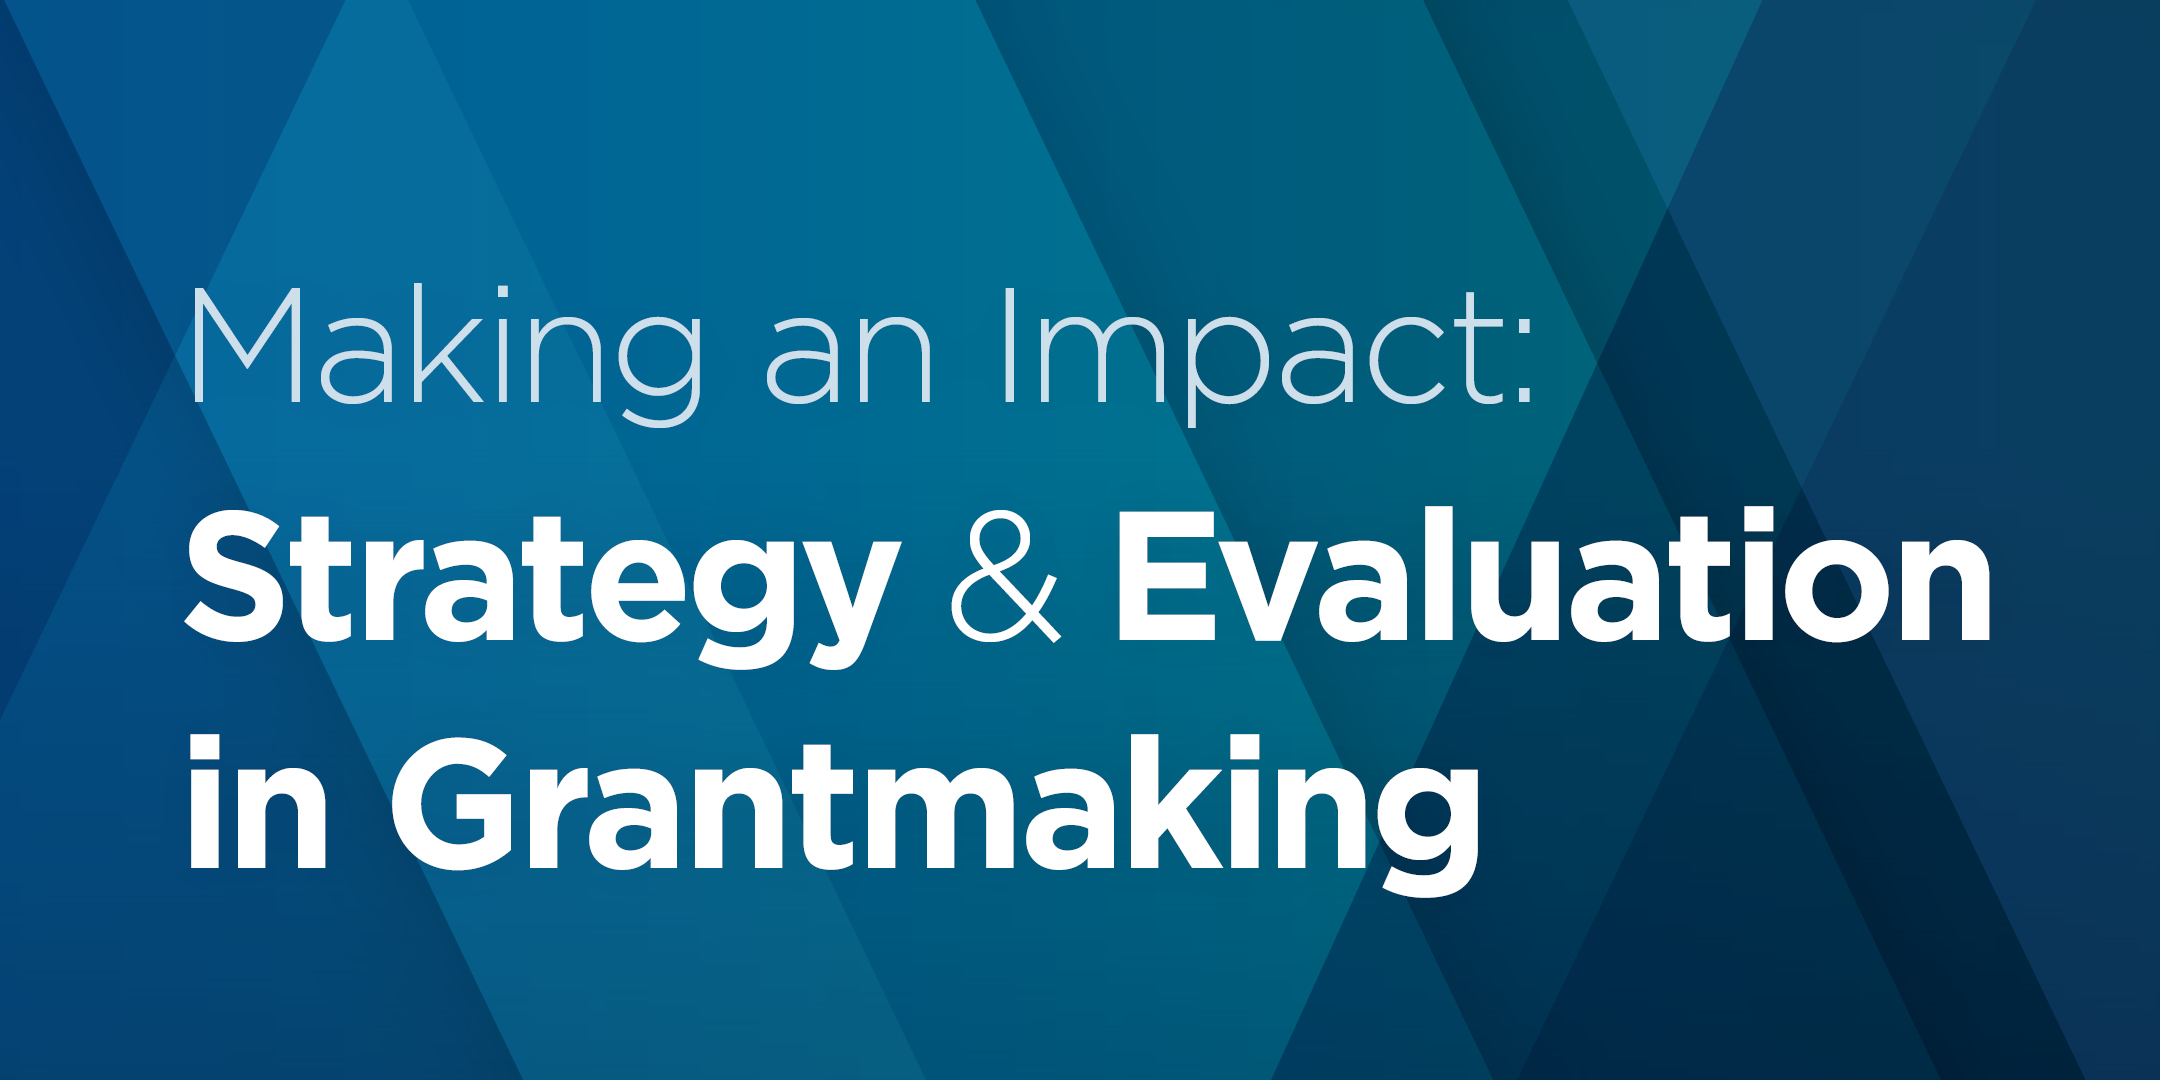 Making an Impact: Strategy & Evaluation in Grantmaking